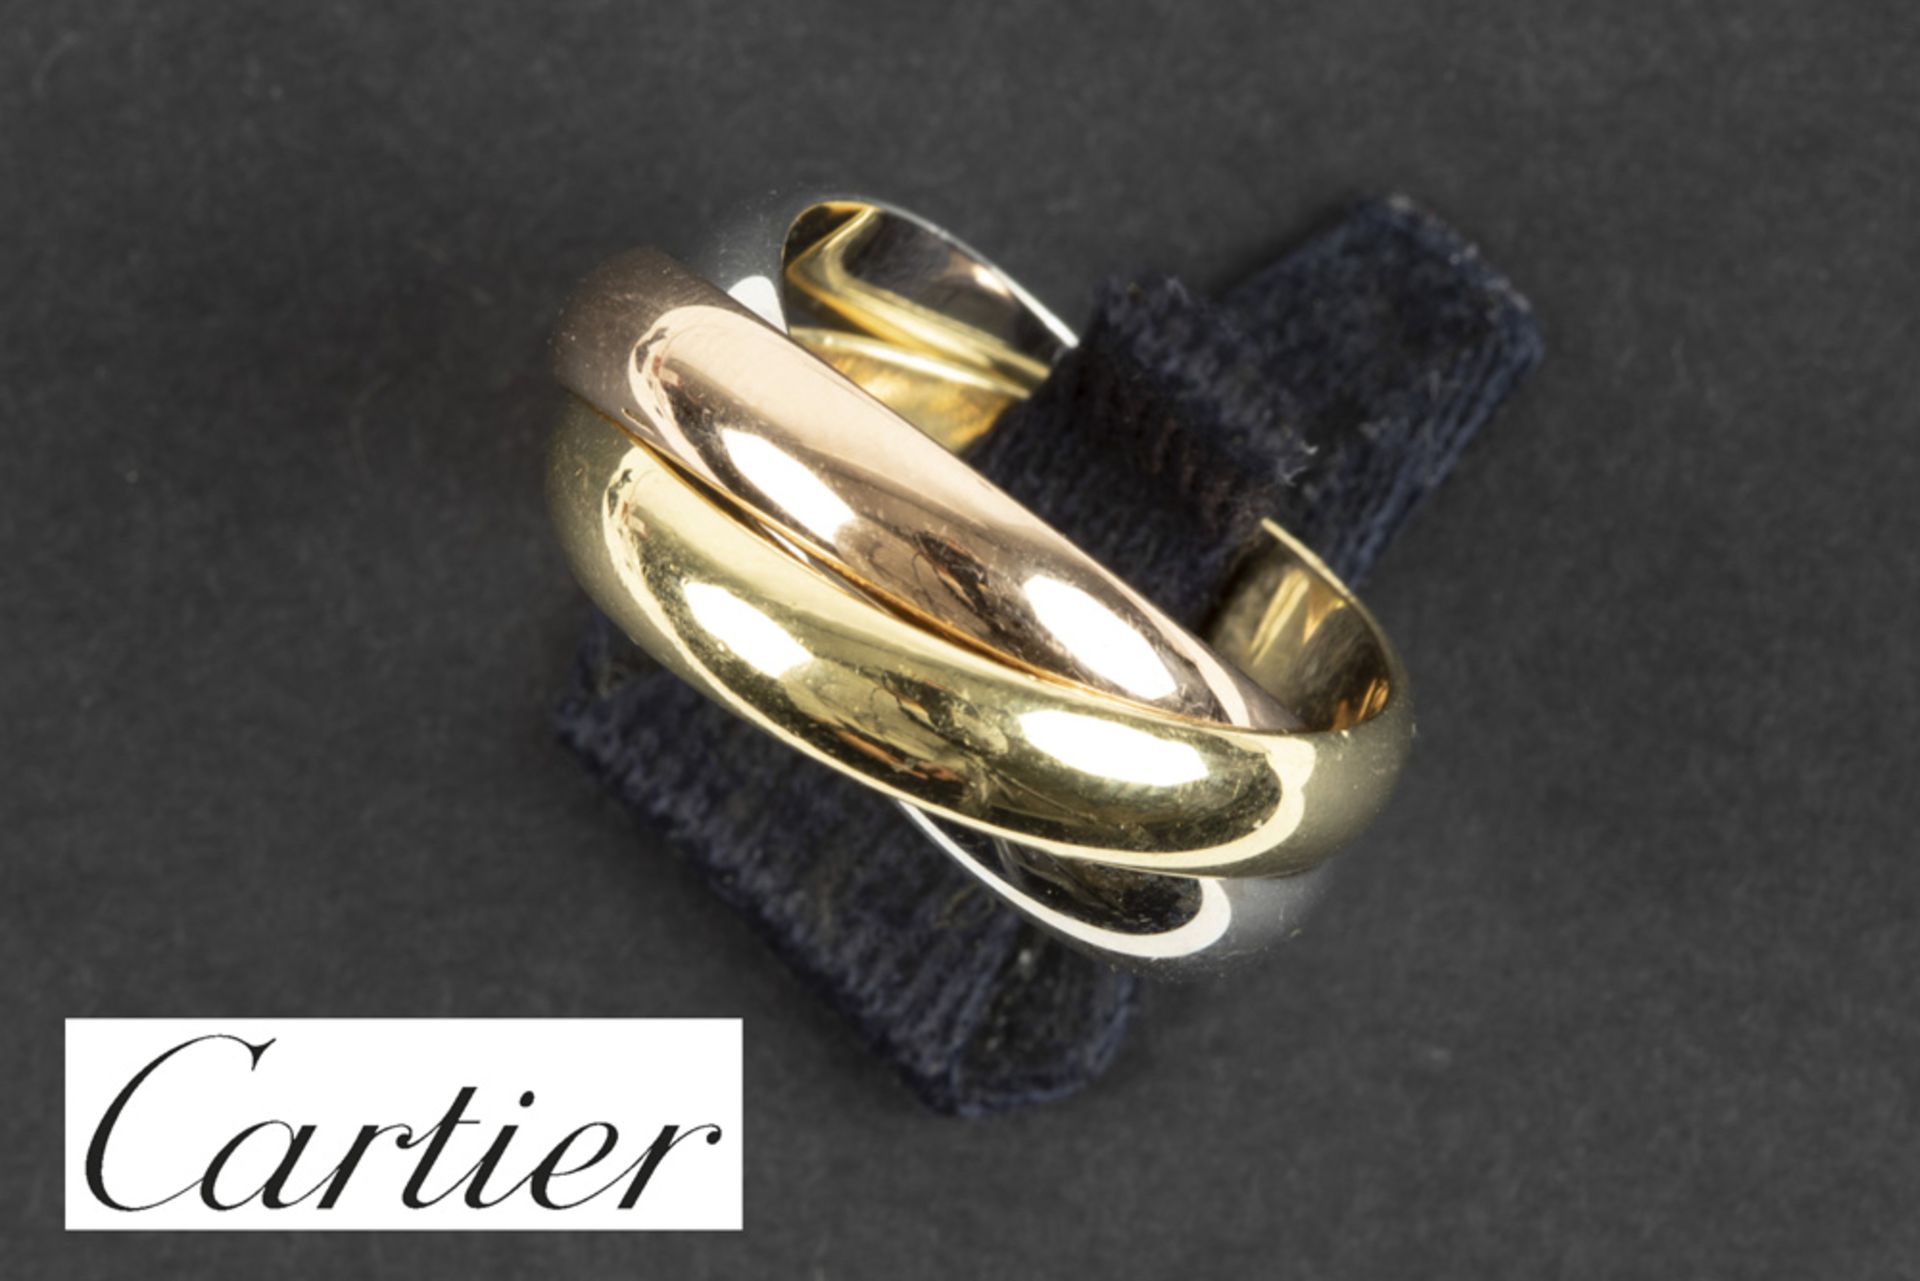 Cartier signed "Trinity" ring in yellow, white and pink gold (18 carat) - with its original box